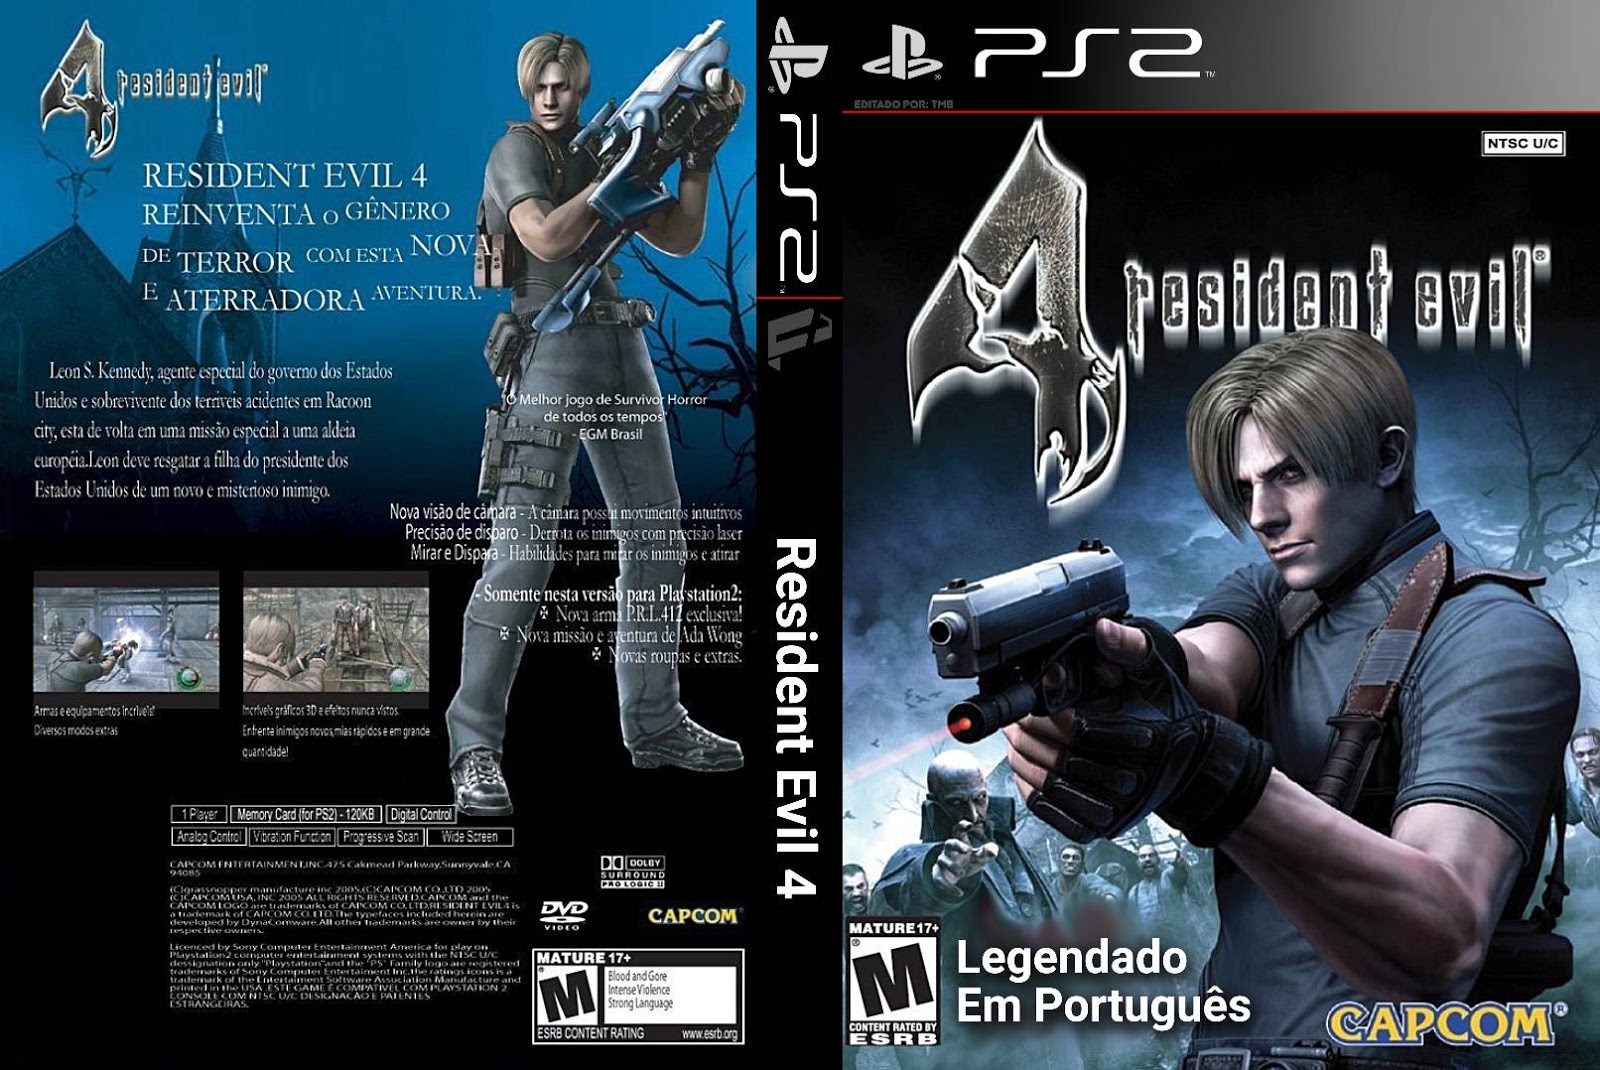 Resident evil пс 2. Диск PLAYSTATION 2 Resident Evil 4. Диски Resident Evil для PLAYSTATION 2. Resident Evil 4 ps4 диск. Resident Evil 2 пс4 диск.